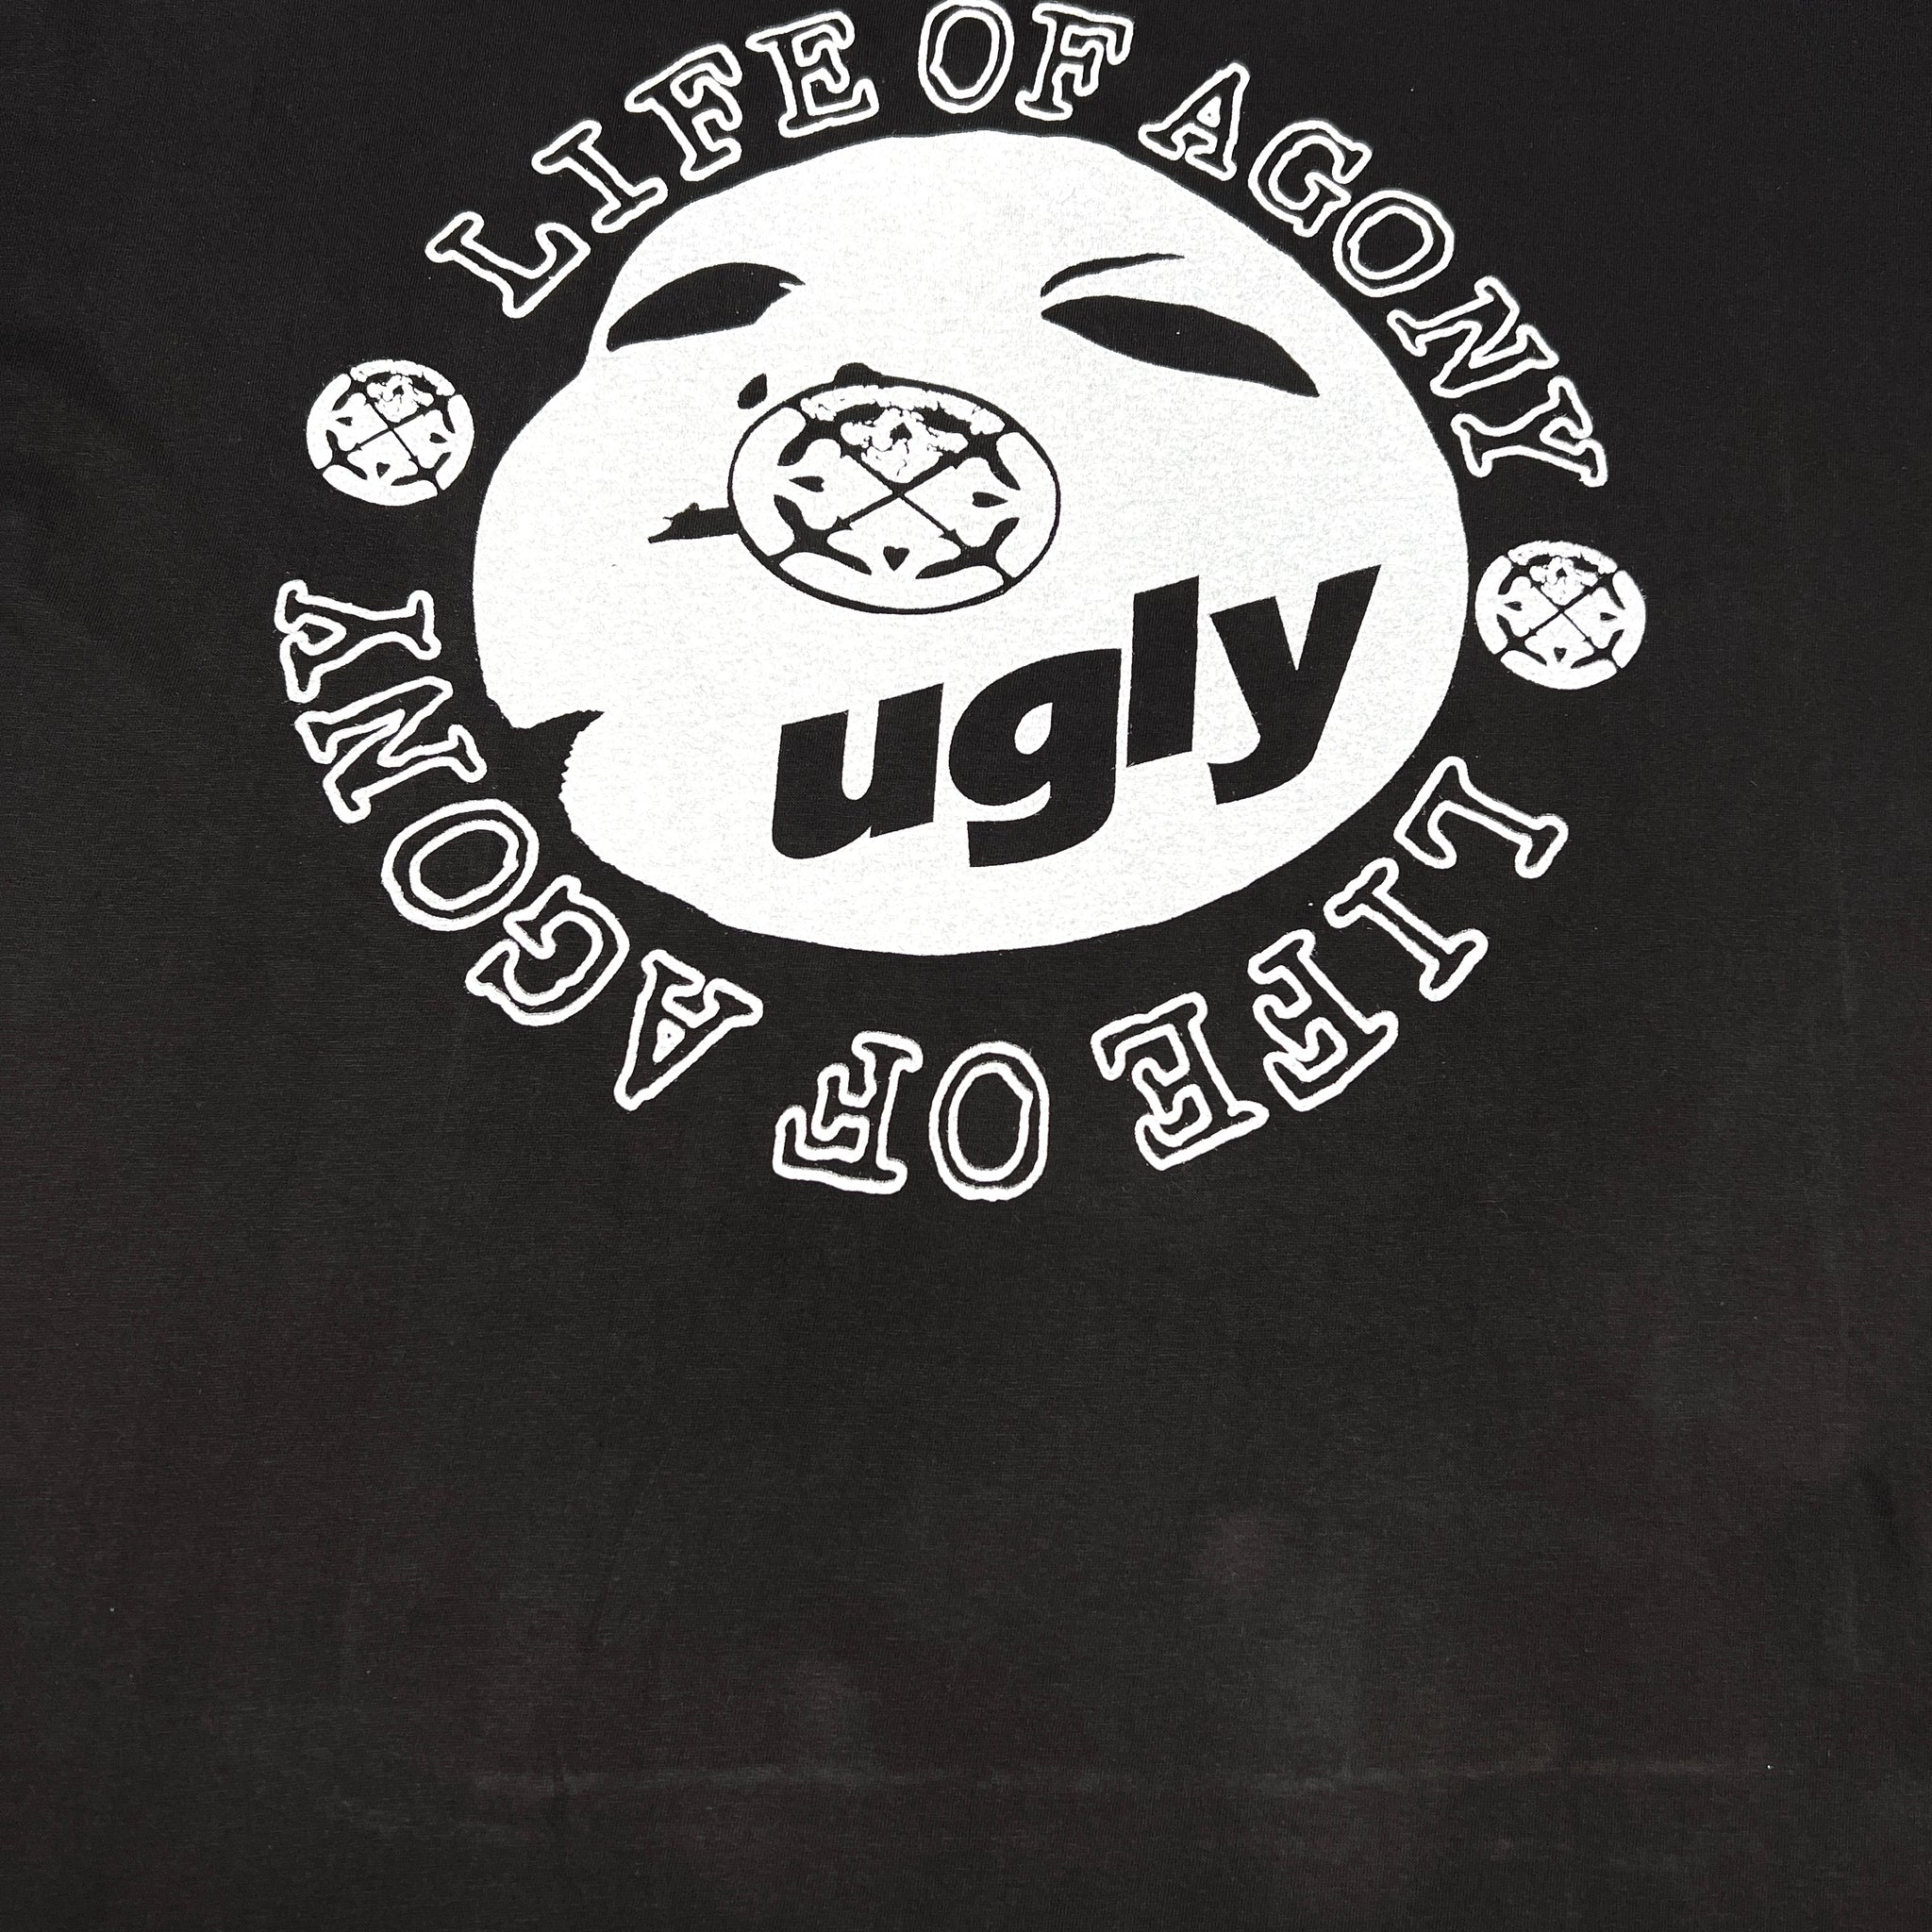 LIFE OF AGONY | ‘Ugly’ | 90s | XL